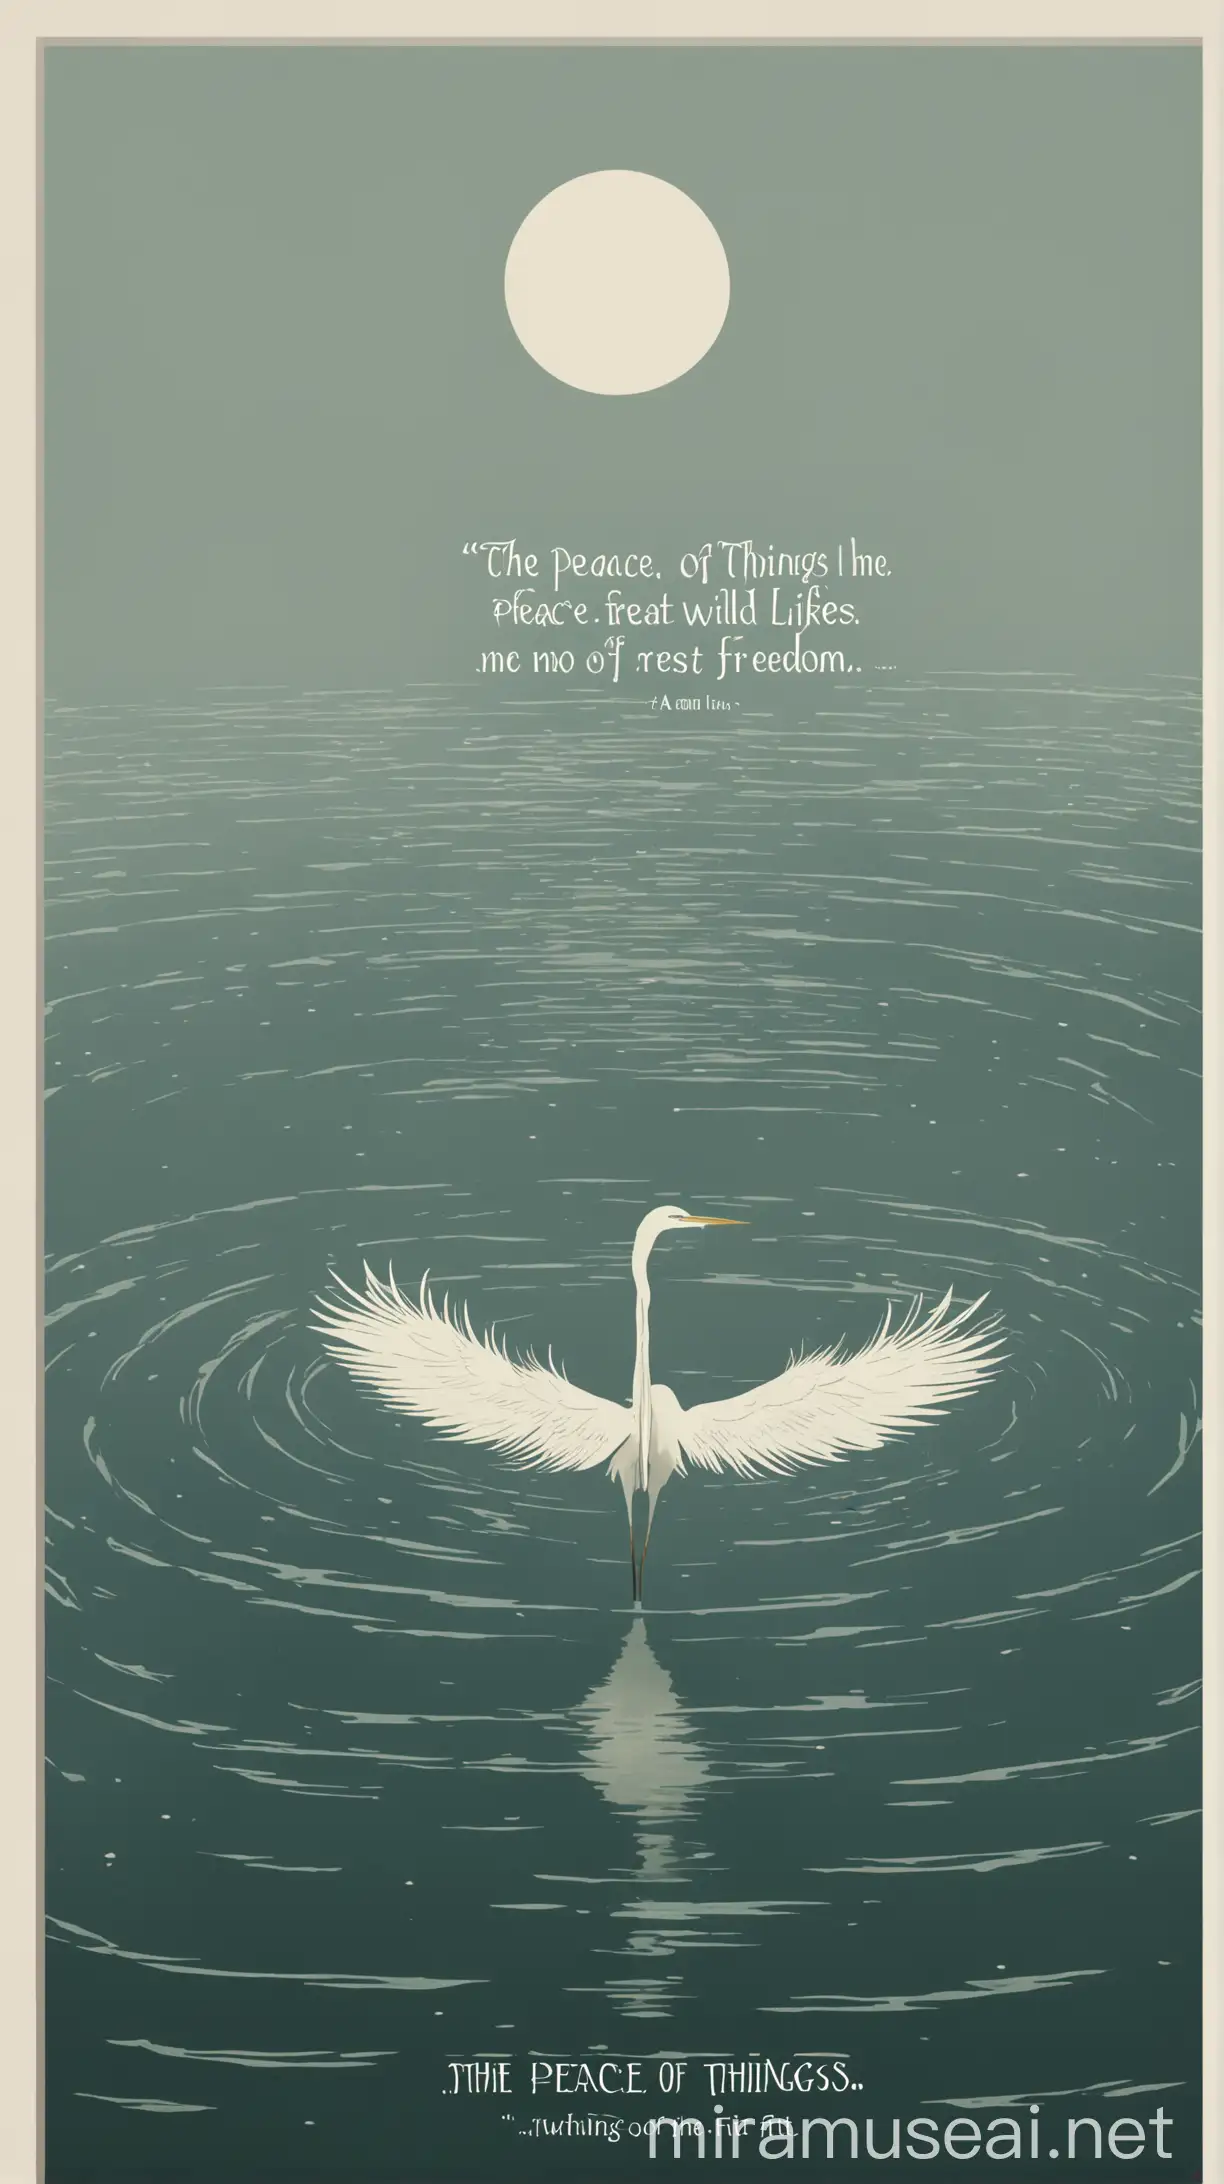 a minimalist typographic poster design inspired by the poem you provided, focusing on feathers and water:

[Image: A minimalist typographic poster with a serene backdrop of water, featuring the poem excerpt in elegant typography. A single feather gracefully floats on the water's surface, symbolizing peace and freedom.]

Title: "The Peace of Wild Things"

Text:
"When despair for the world grows in me
and I wake in the night at the least sound
in fear of what my life and my children’s lives may be,
I go and lie down where the wood drake
rests in his beauty on the water, and the great heron feeds.
I come into the peace of wild things
who do not tax their lives with forethought
of grief. I come into the presence of still water.
And I feel above me the day-blind stars
waiting with their light. For a time
I rest in the grace of the world, and am free."

Feel free to adjust the design as you see fit!